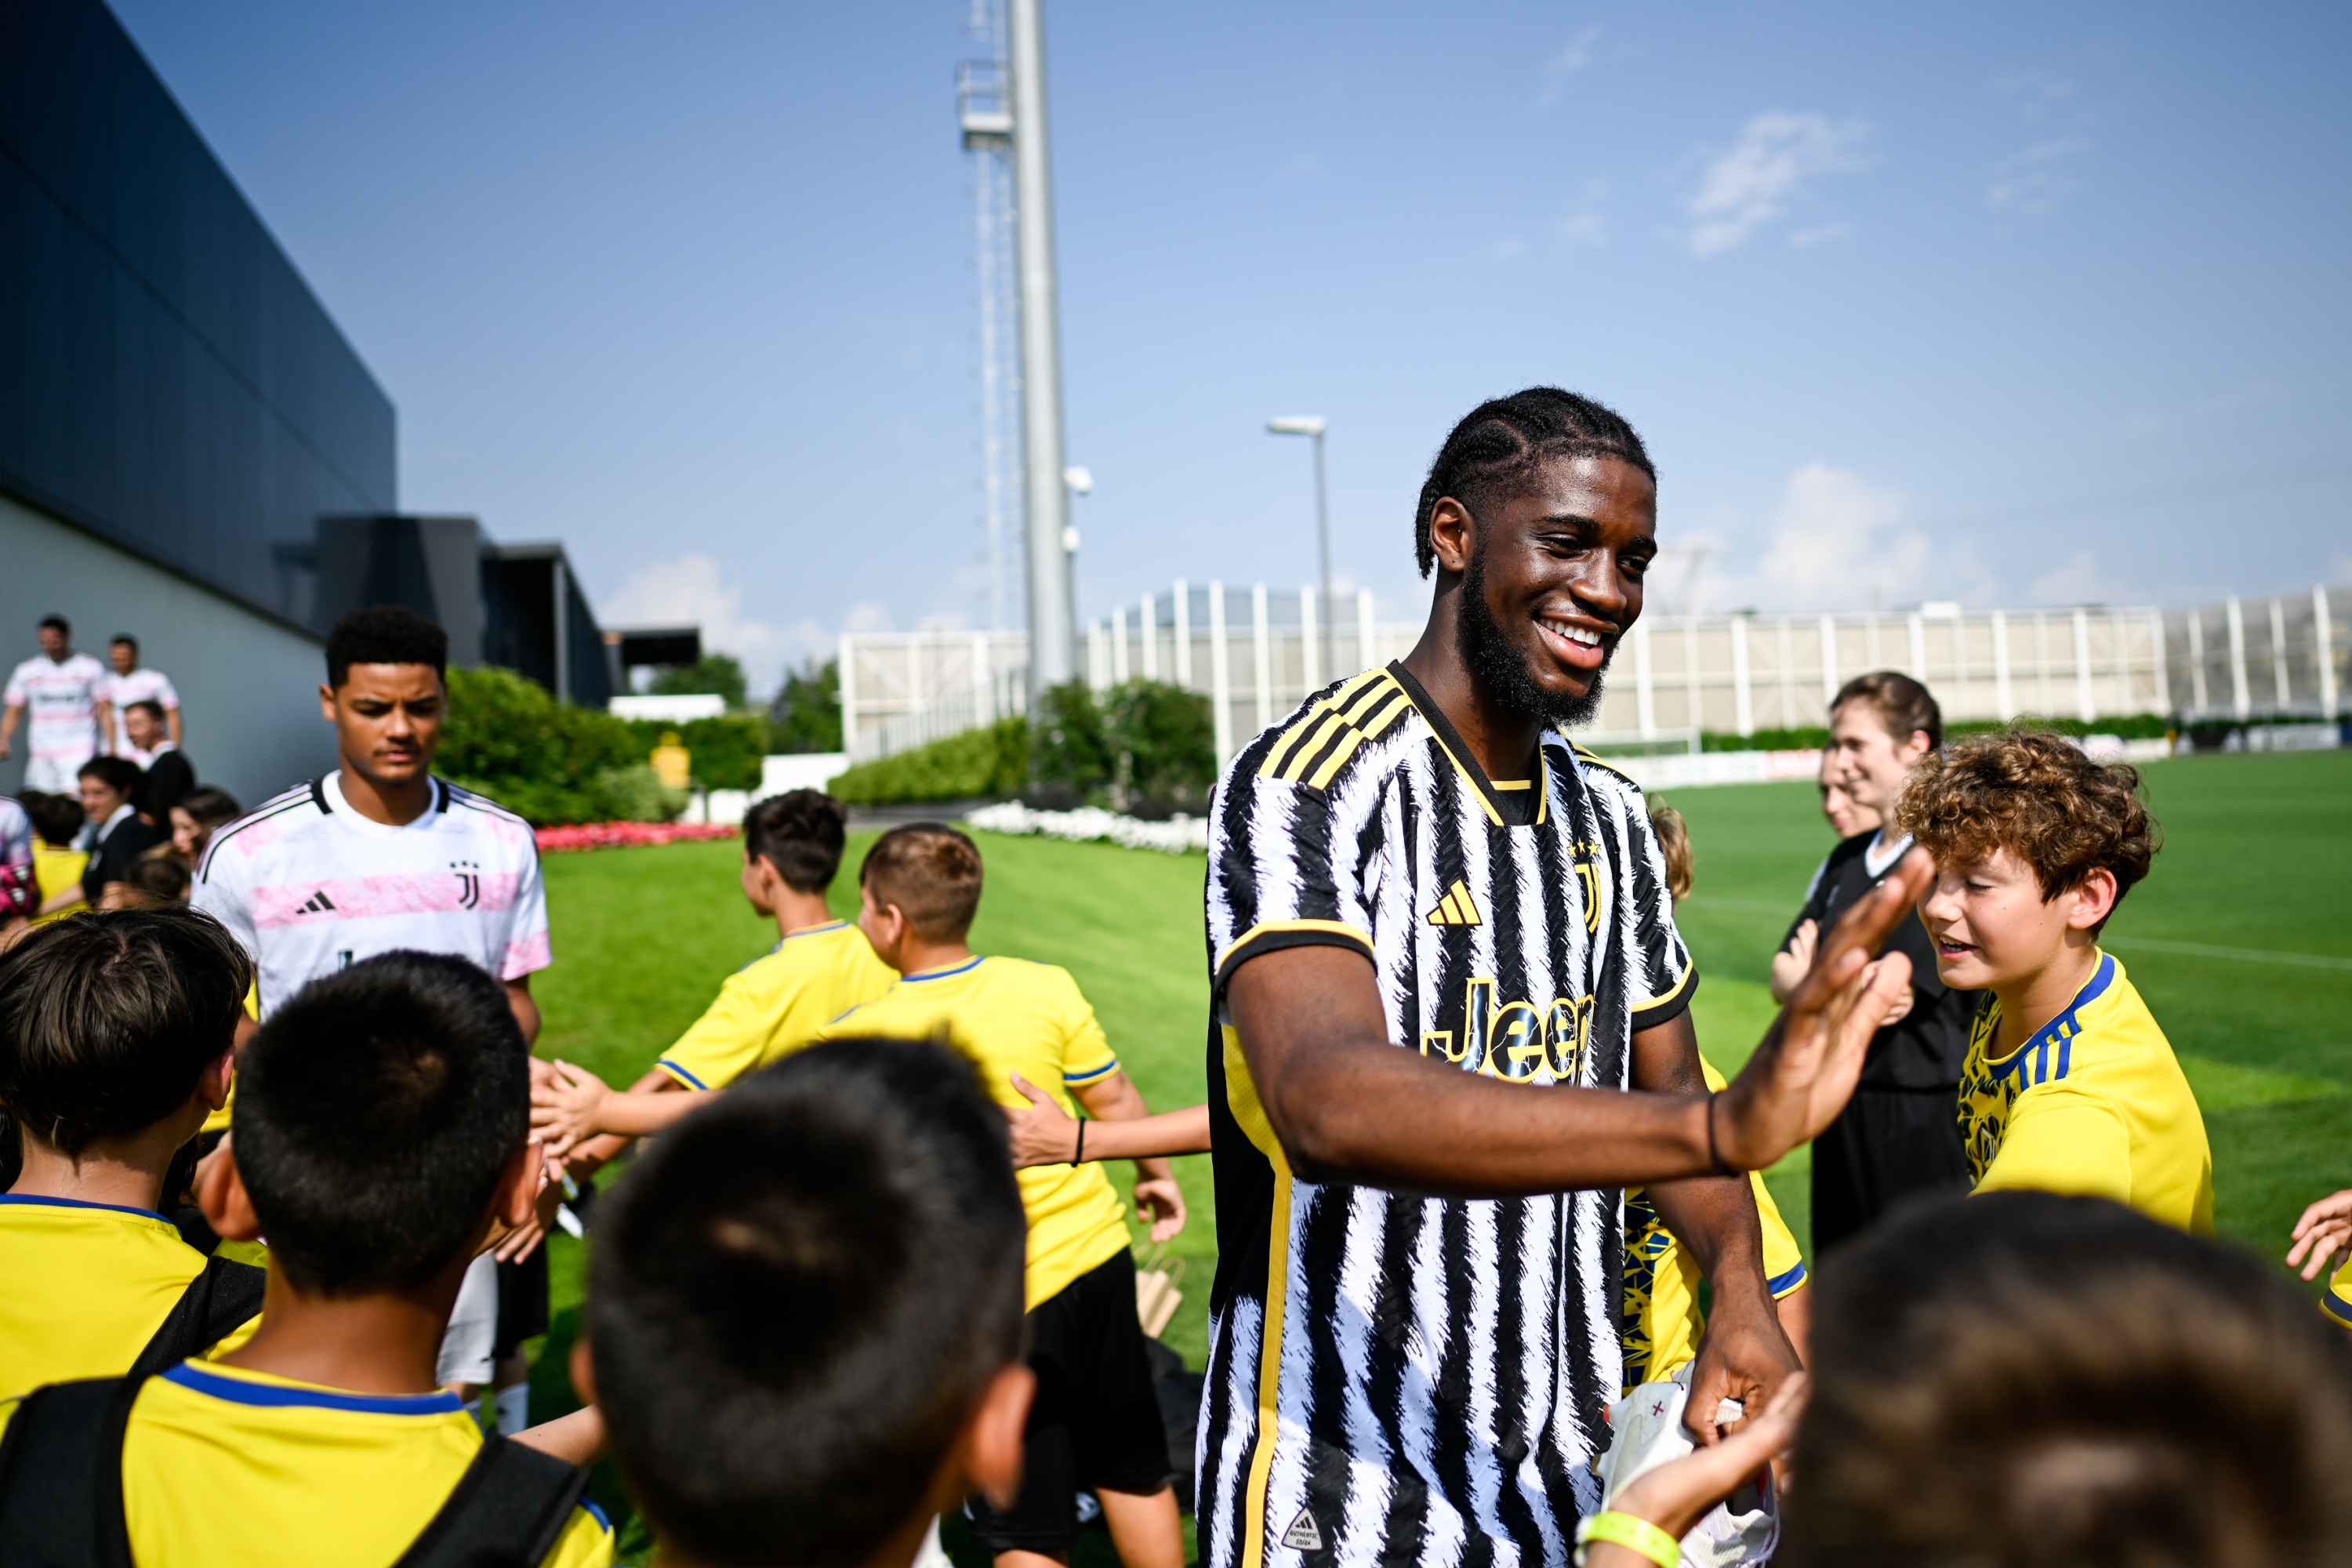 TURIN, ITALY - JULY 15: Samuel Iling of Juventus during a training session at JTC on July 15, 2023 in Turin, Italy. (Photo by Daniele Badolato - Juventus FC/Juventus FC via Getty Images)